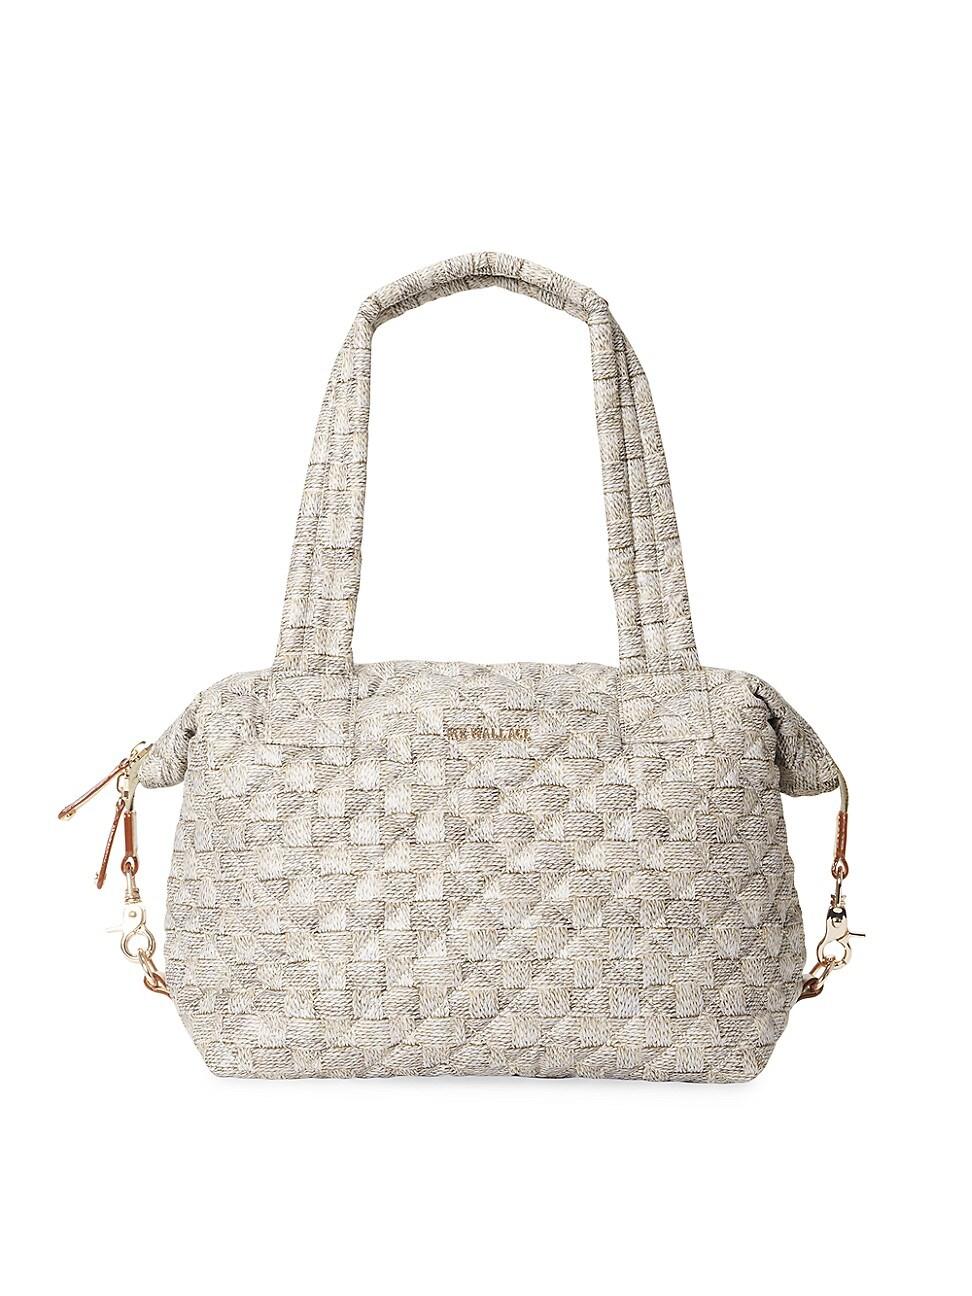 MZ Wallace Medium Sutton Deluxe Quilted Nylon Shoulder Bag in White | Lyst